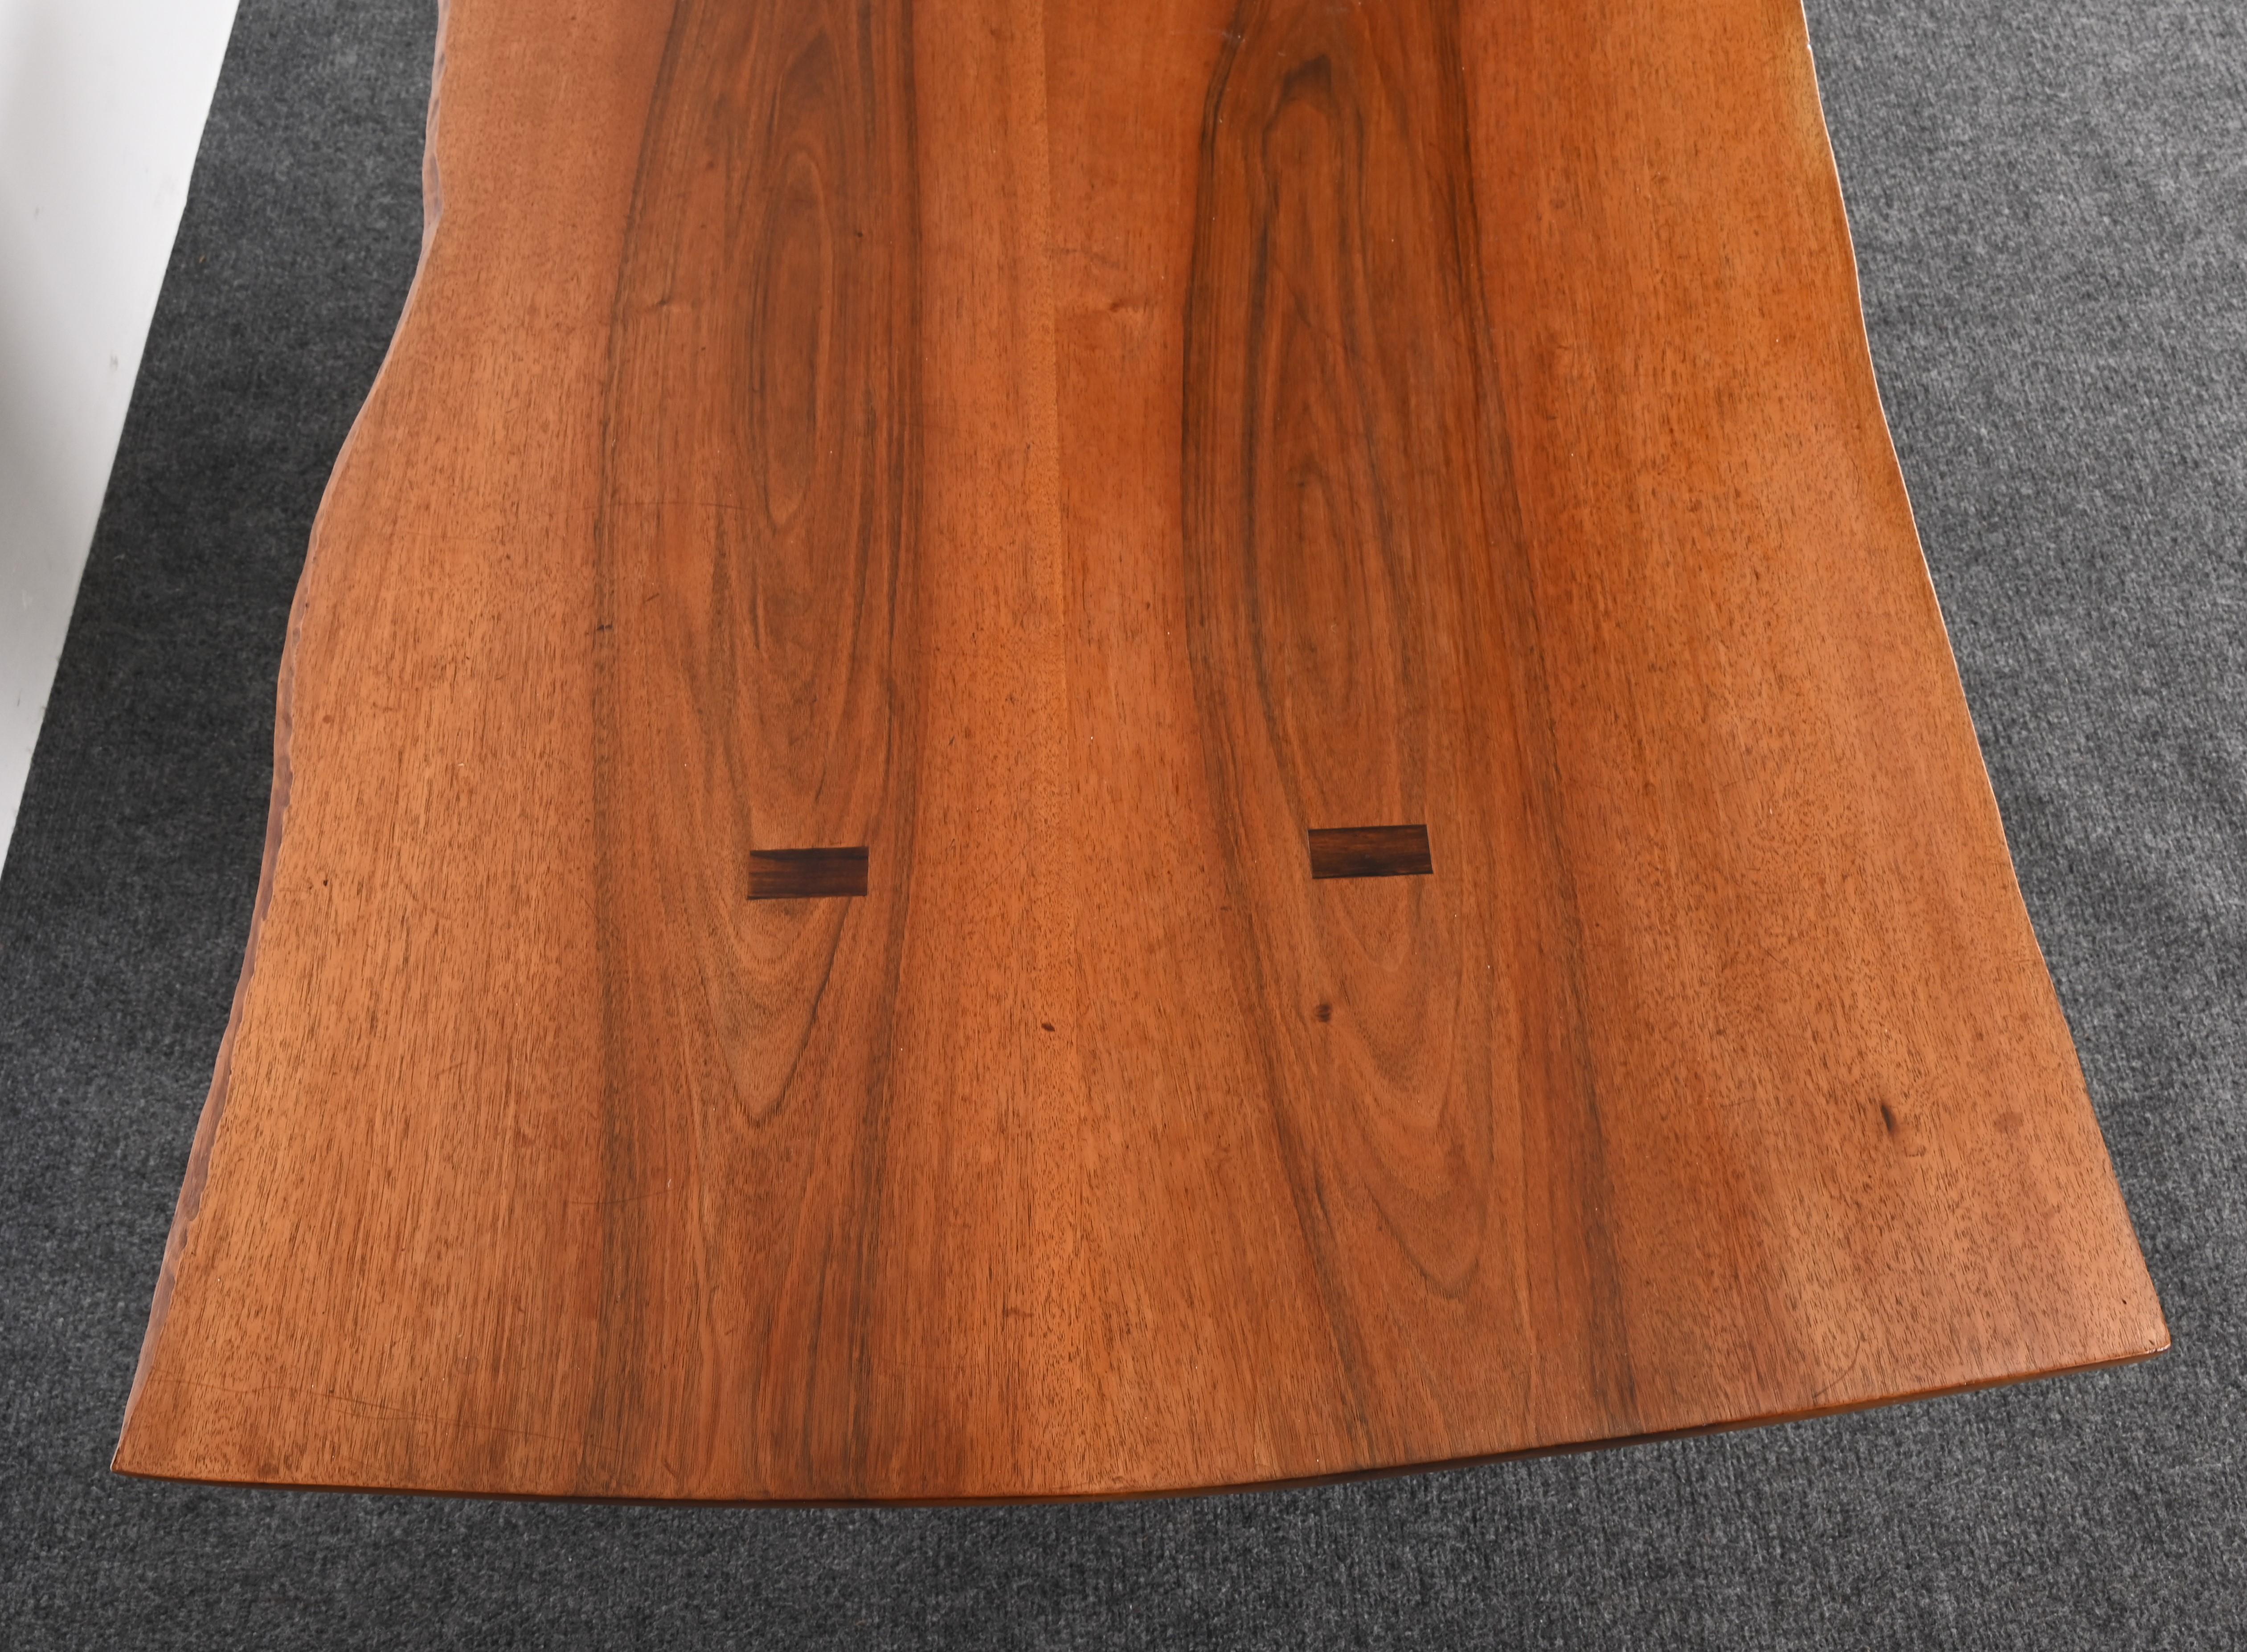 Live Edge Solid Walnut and Rosewood Coffee Table by Richard Rothbard, 1968 For Sale 7